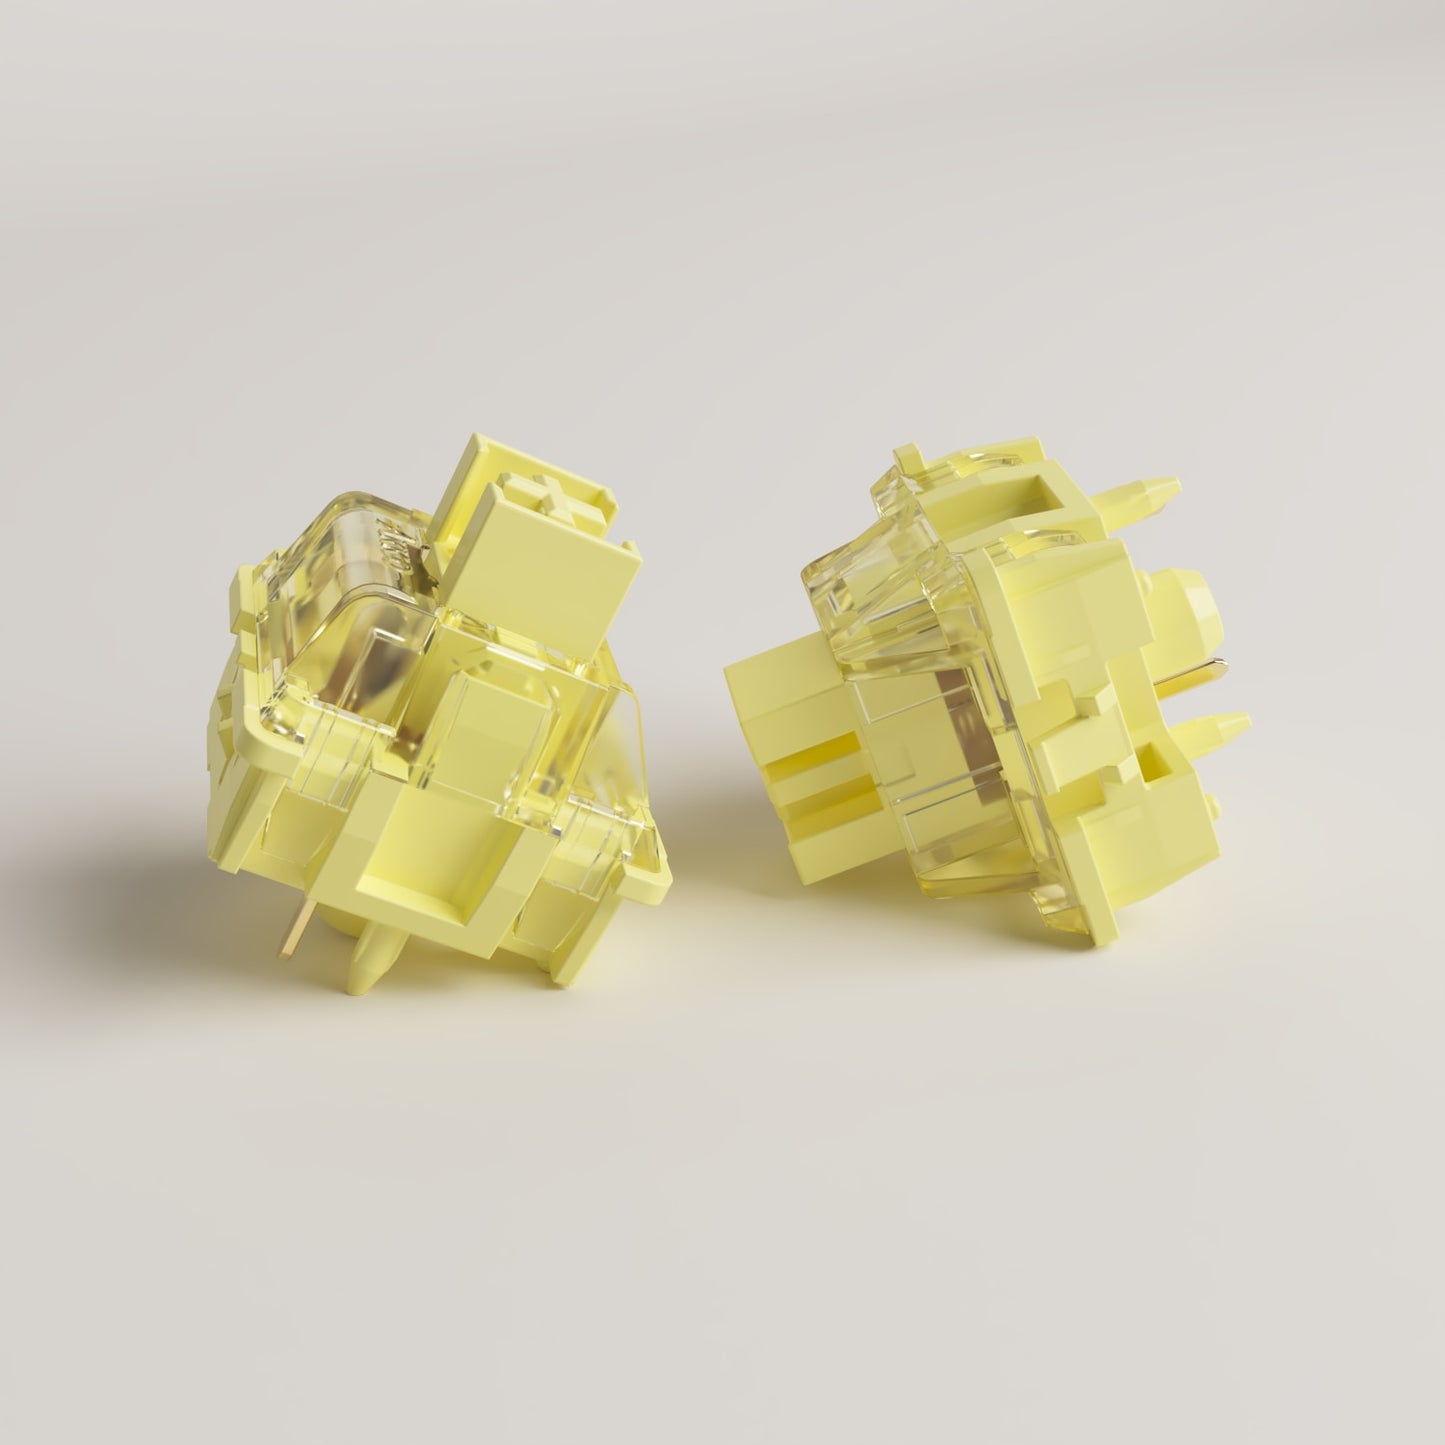 Akko V3 Cream Yellow Pro Switch 5 Pin 50gf Linear Switch with Dustproof Stem Compatible with MX Mechanical Keyboard